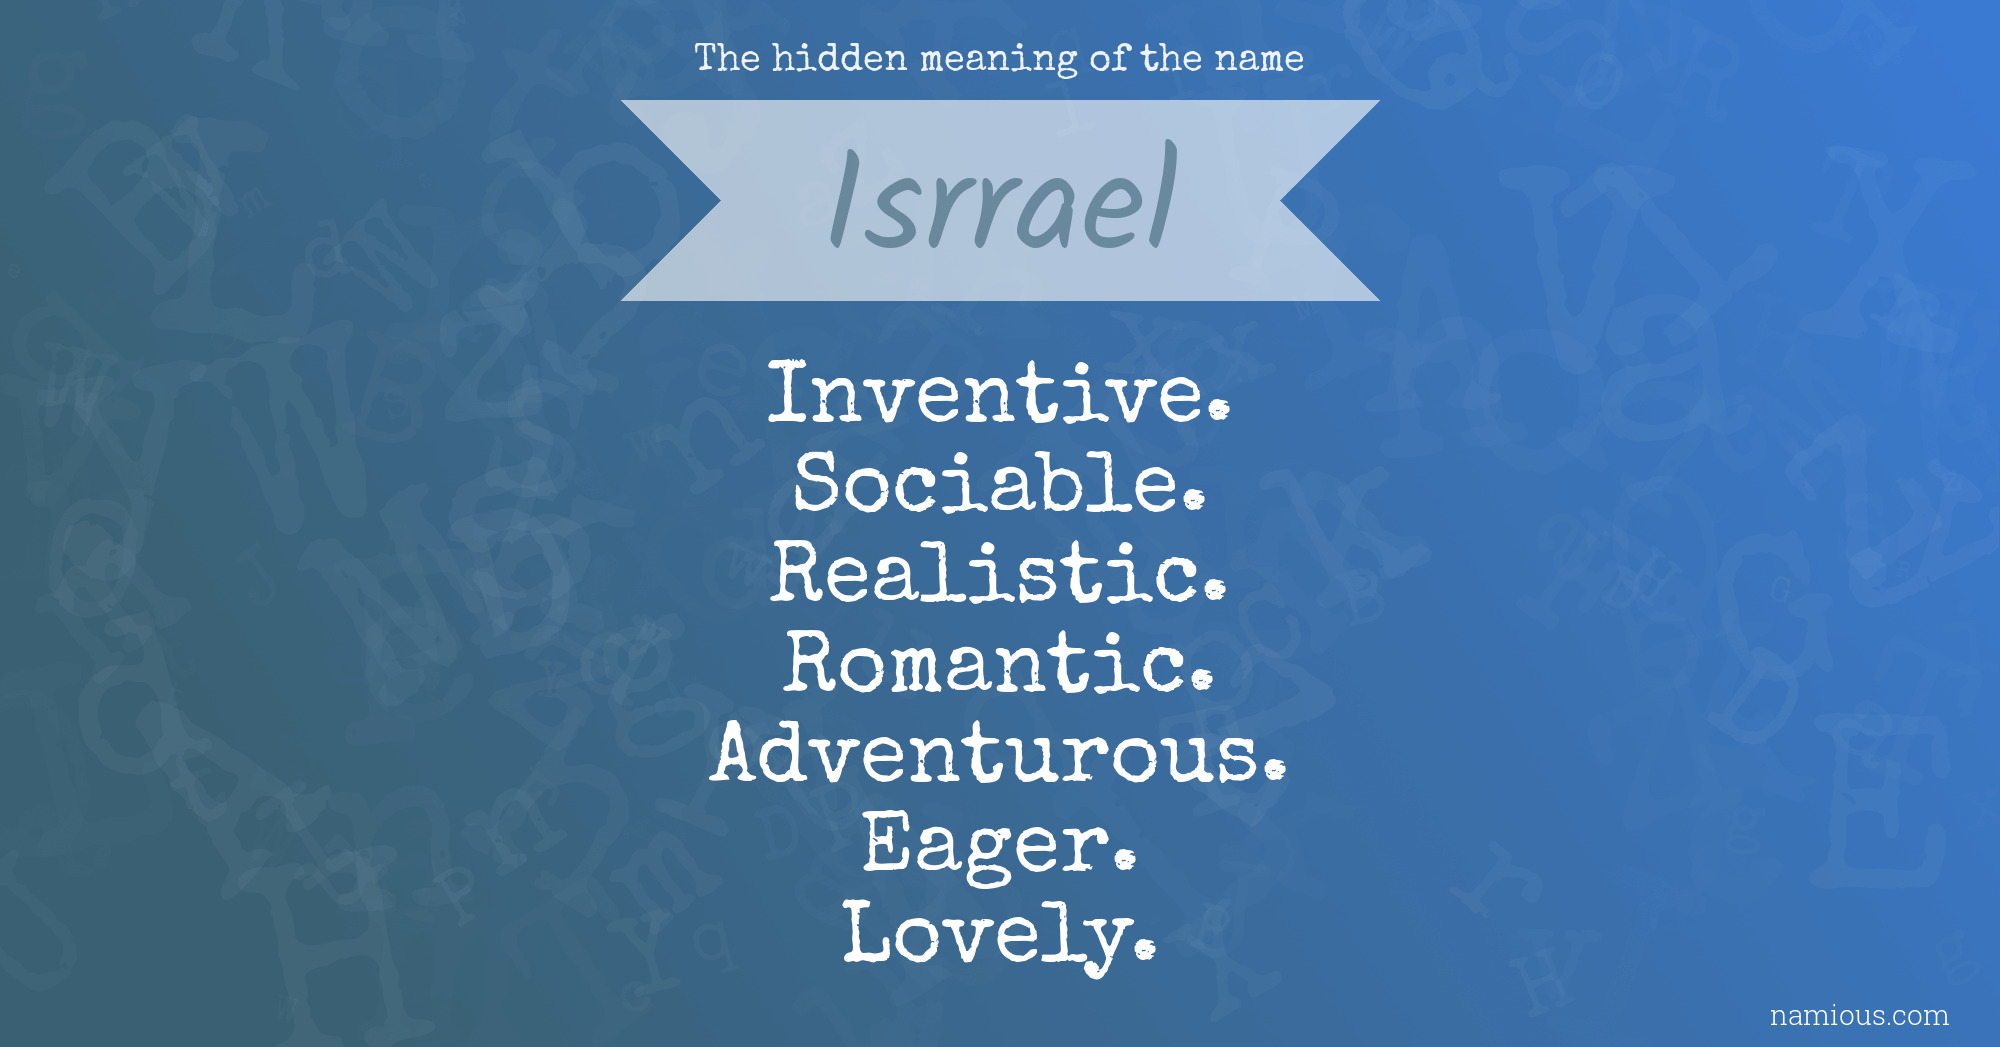 The hidden meaning of the name Isrrael